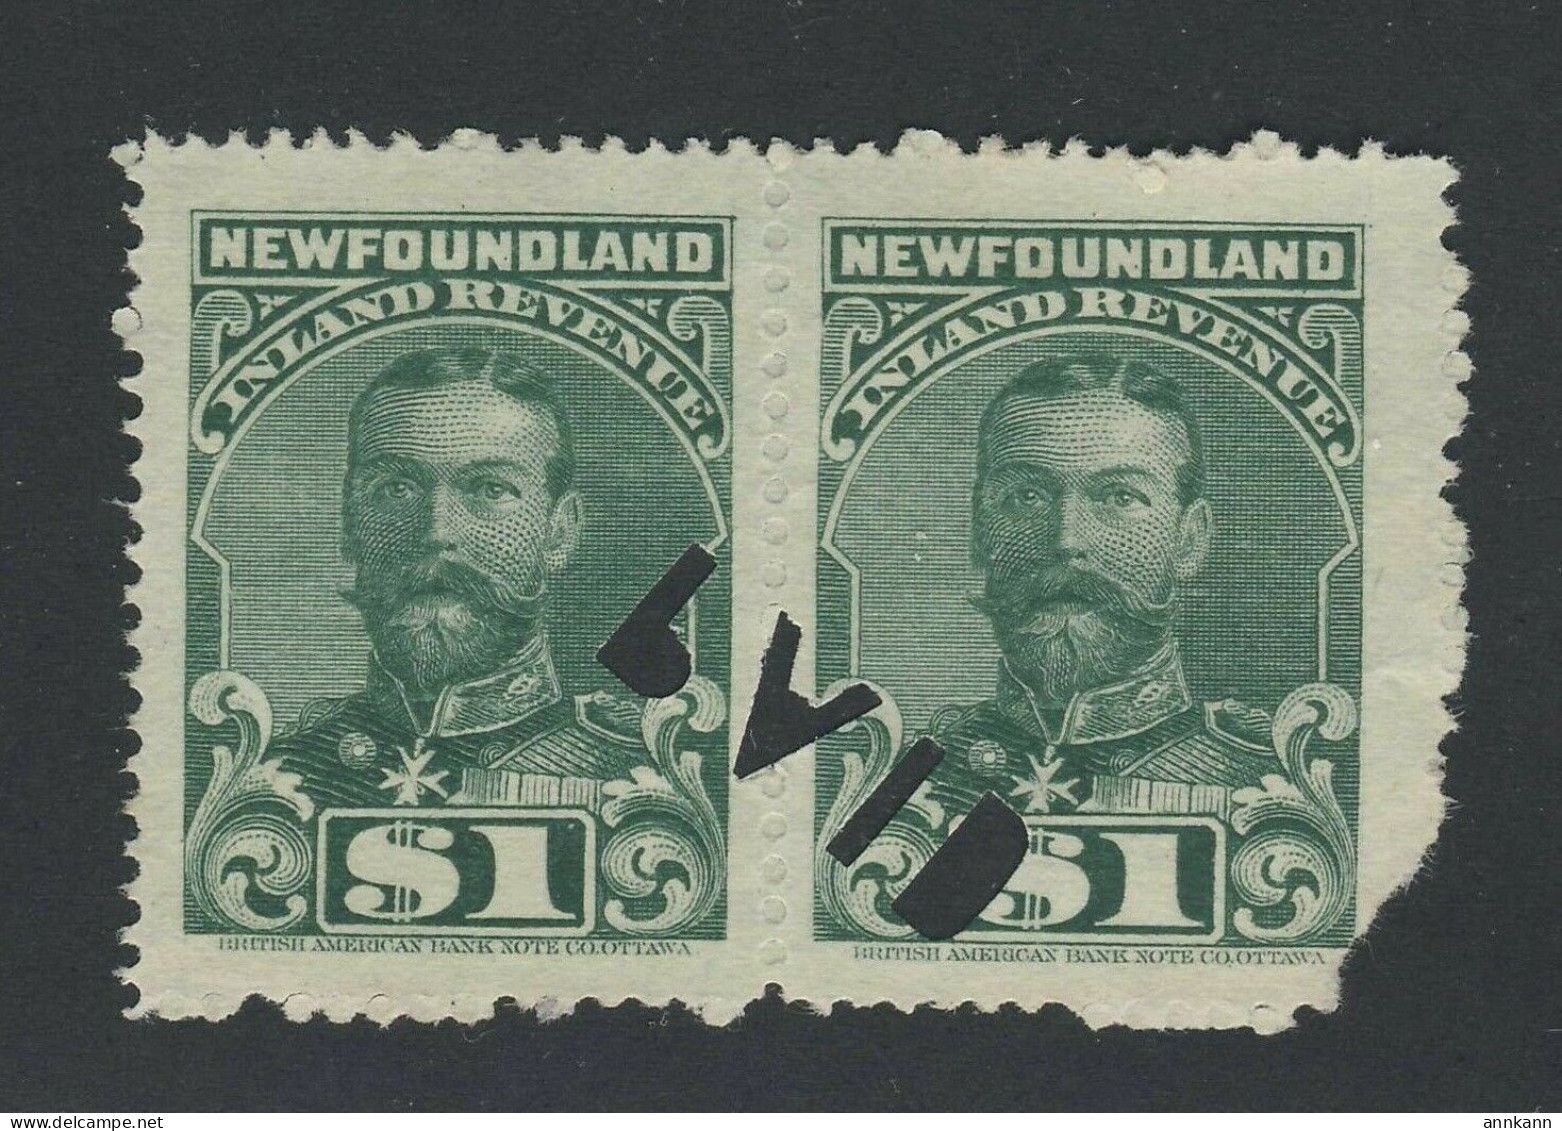 2x Newfoundland Used Inland Revenue Stamps 1910 George V Pair NFR 20-$1.00 - Fiscales